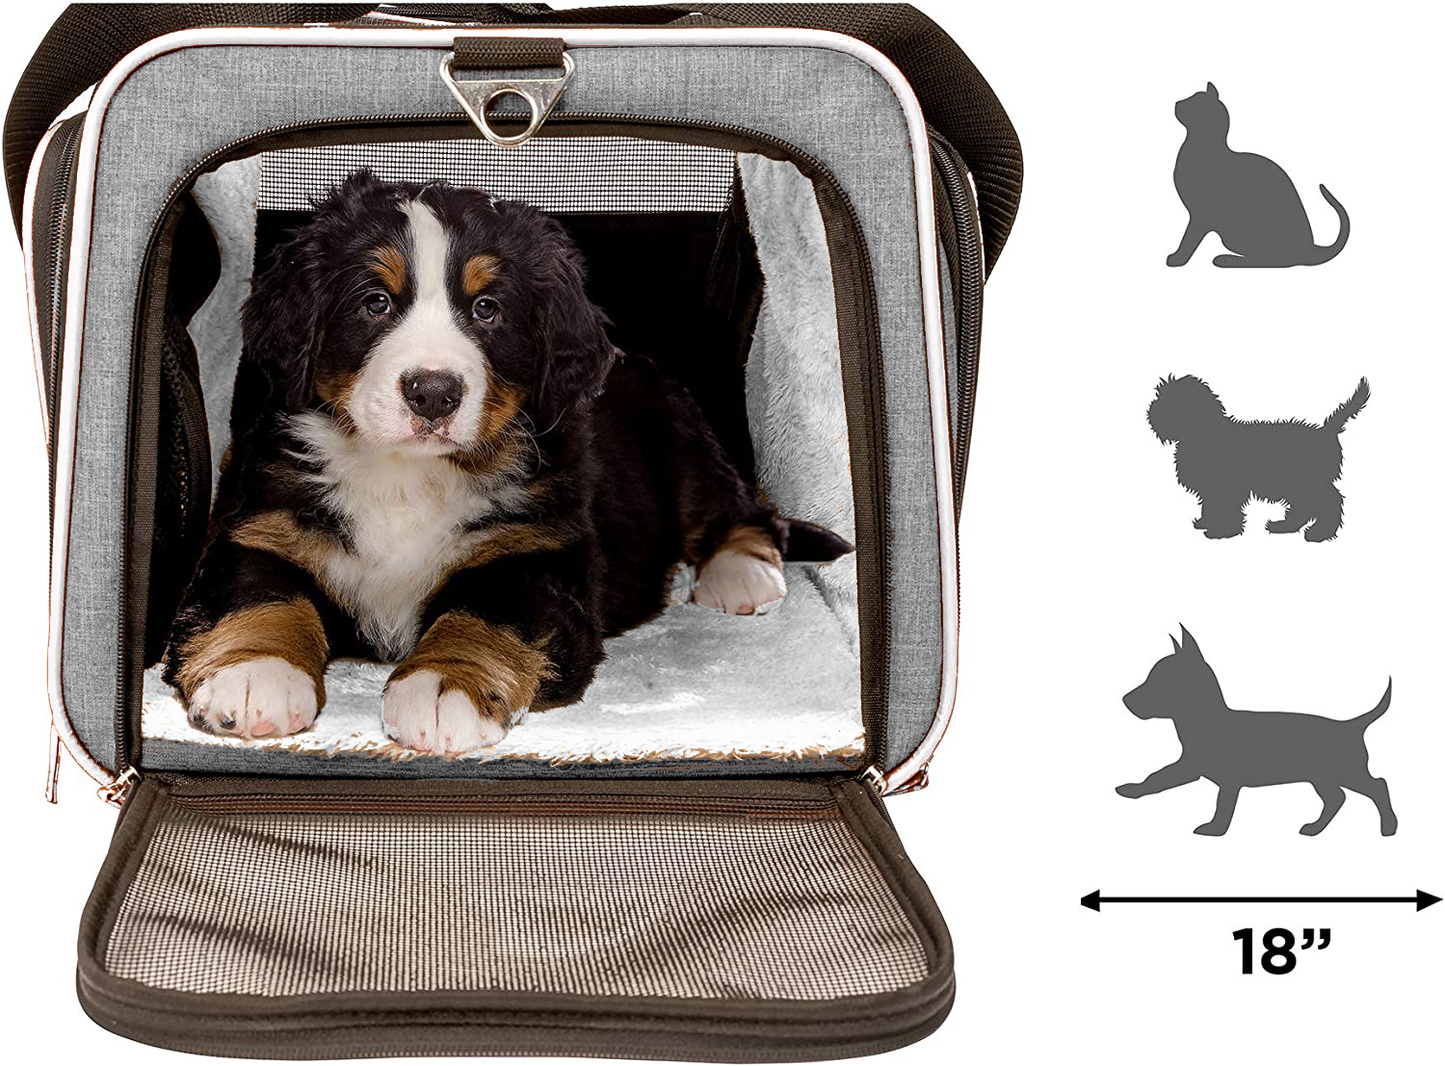 Pet owners' choice for a long journey is pet carriers with wheels